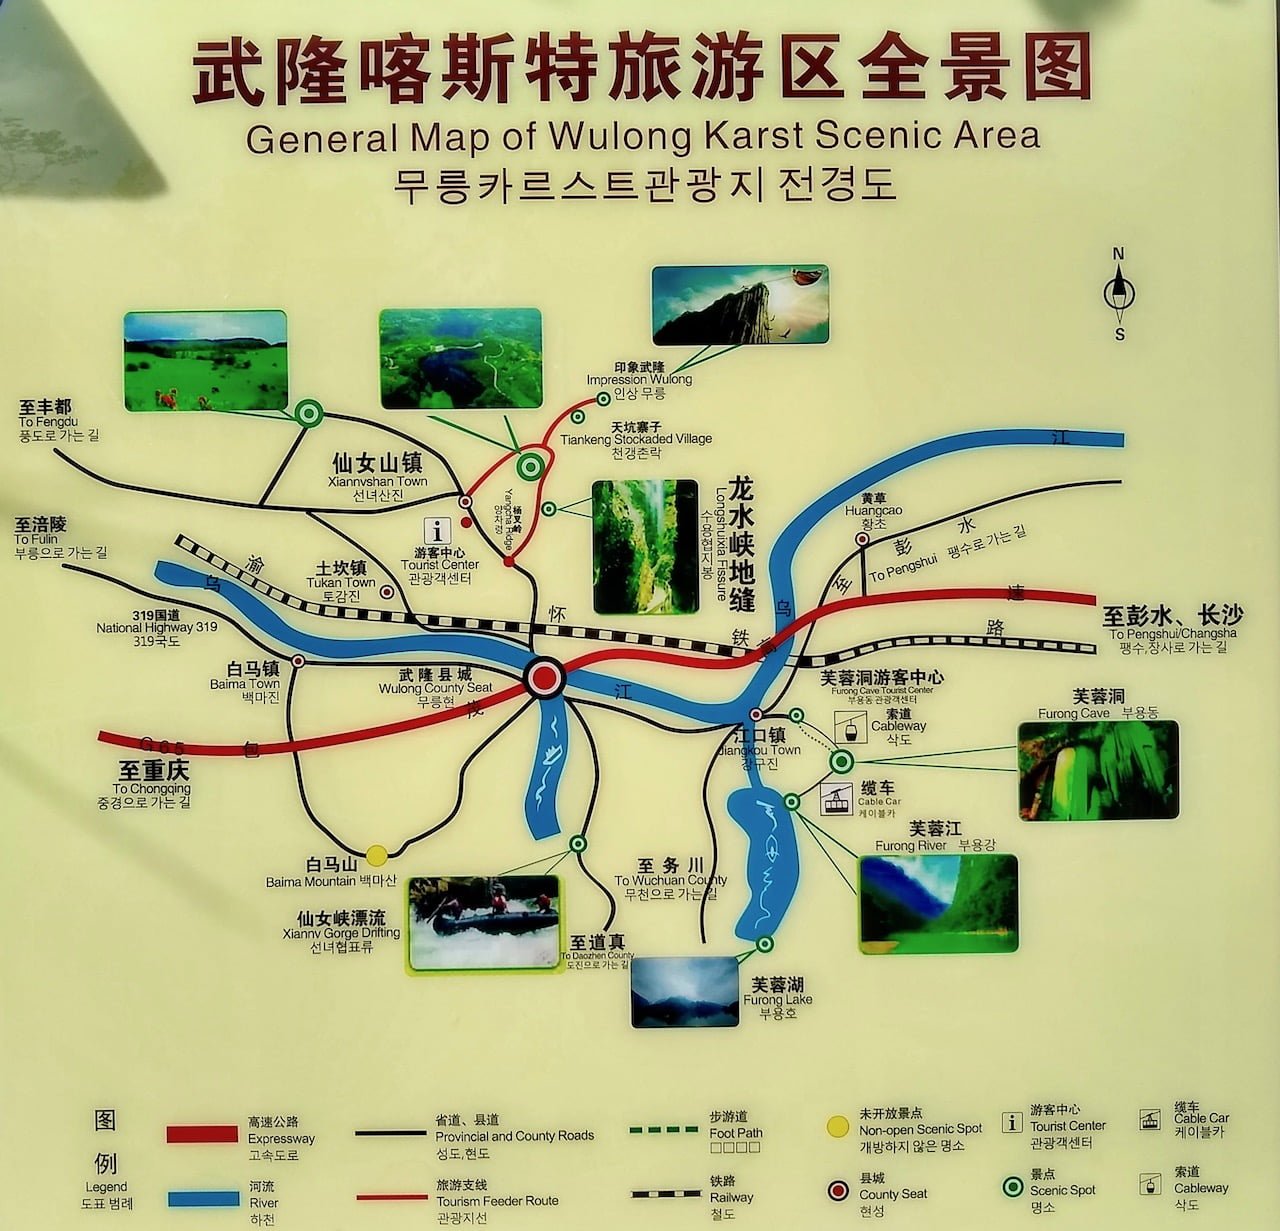 A map of Wulong Karst National Geology Park in Wulong, Chongqing, China. The park has attractions such as Furong Cave, the 3 Natural Bridges, and Longshuixia Gap